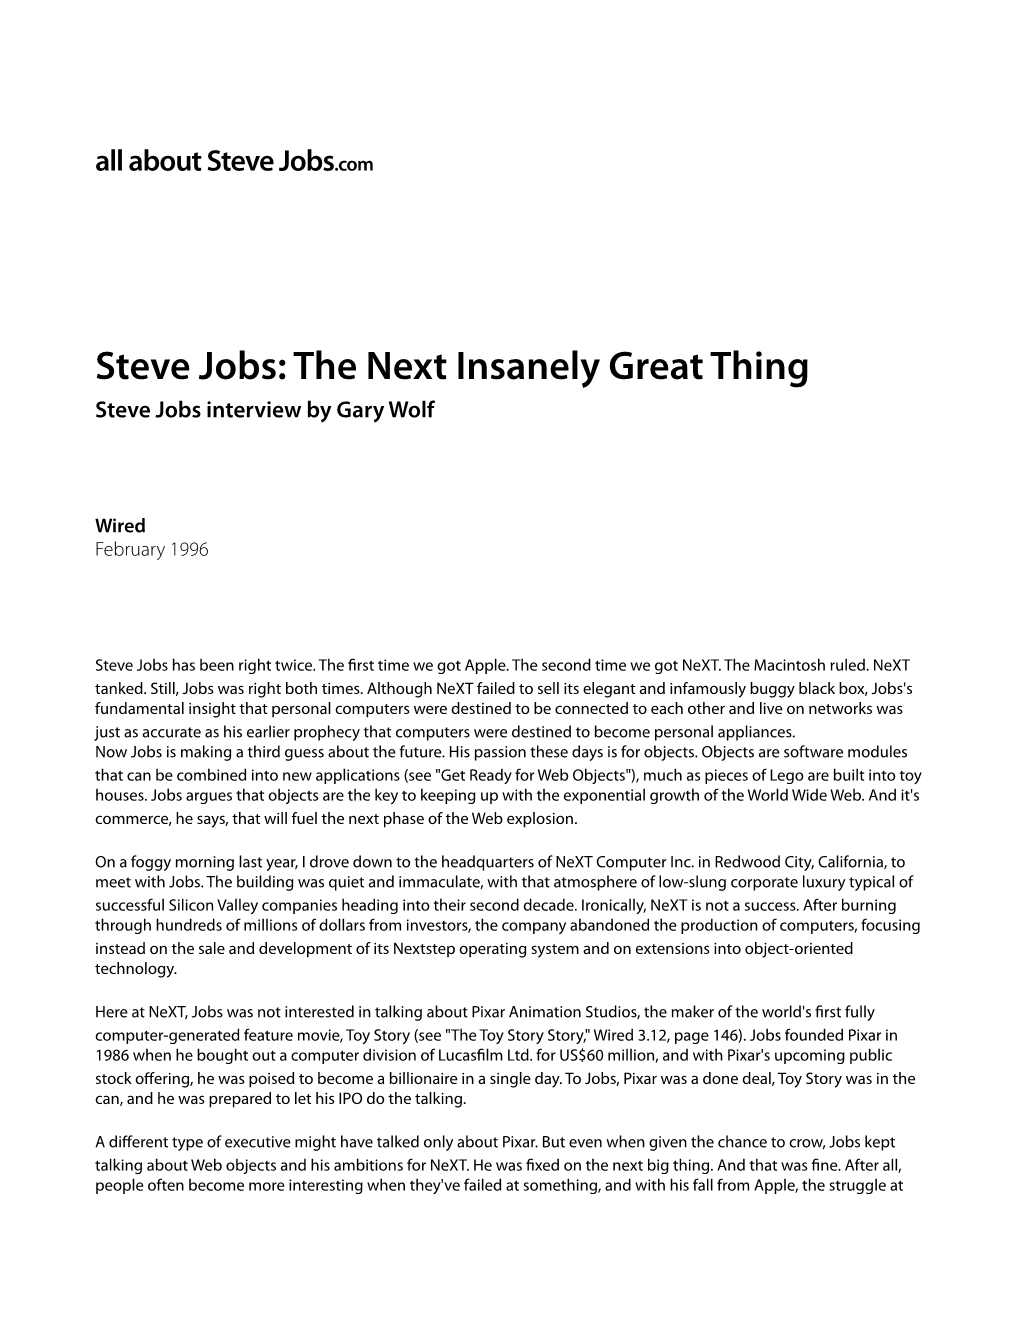 Steve Jobs: the Next Insanely Great Thing (February 1996) - 1 / 10 All About Steve Jobs.Com